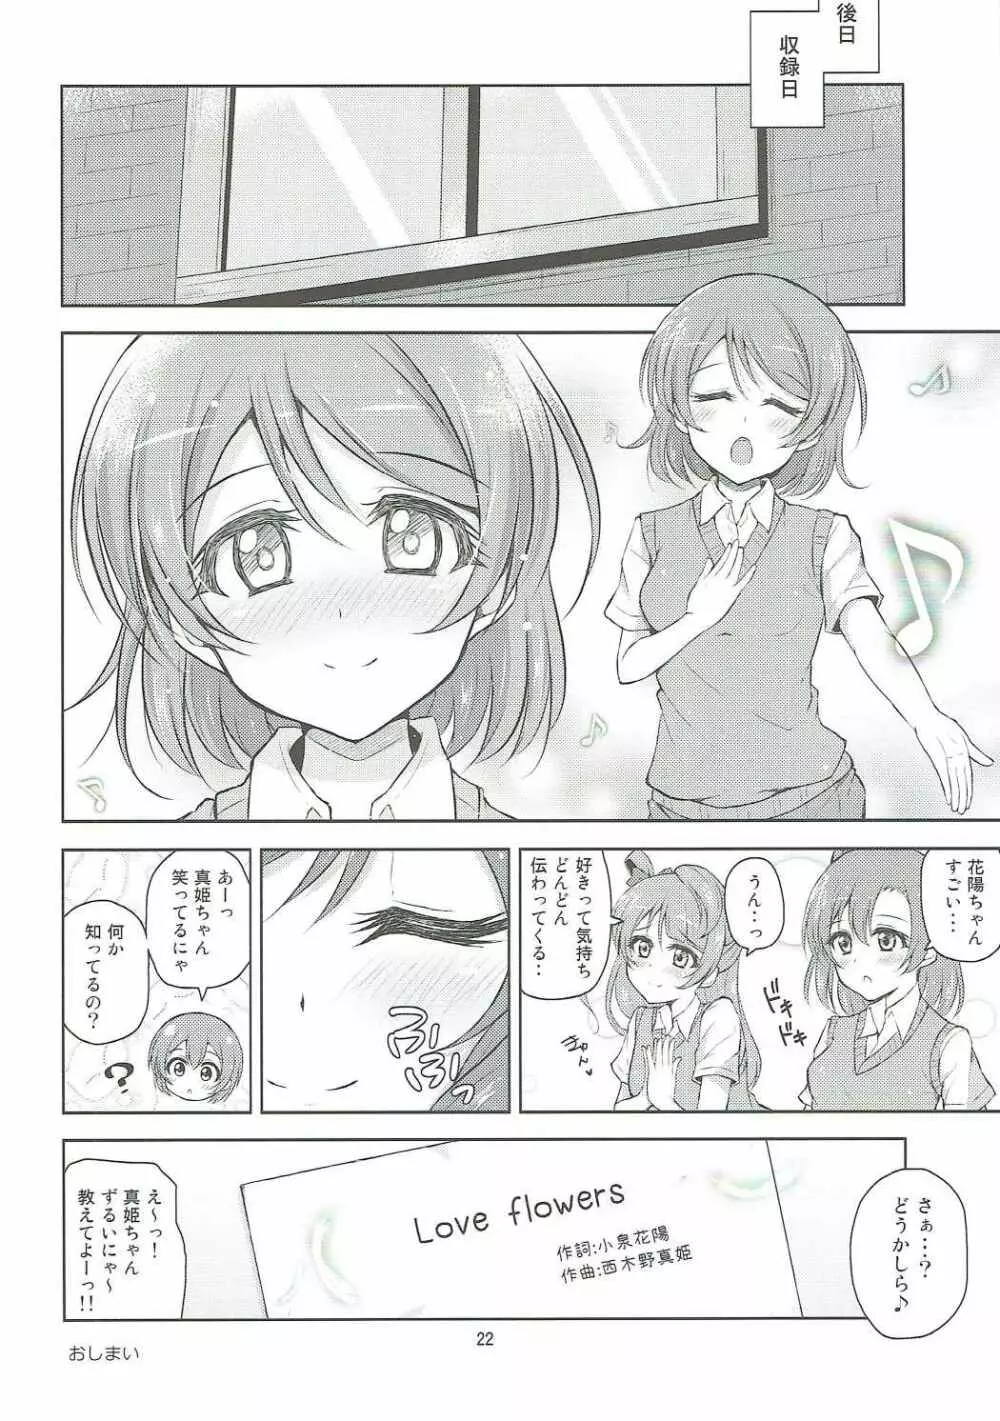 Love flowers Page.21